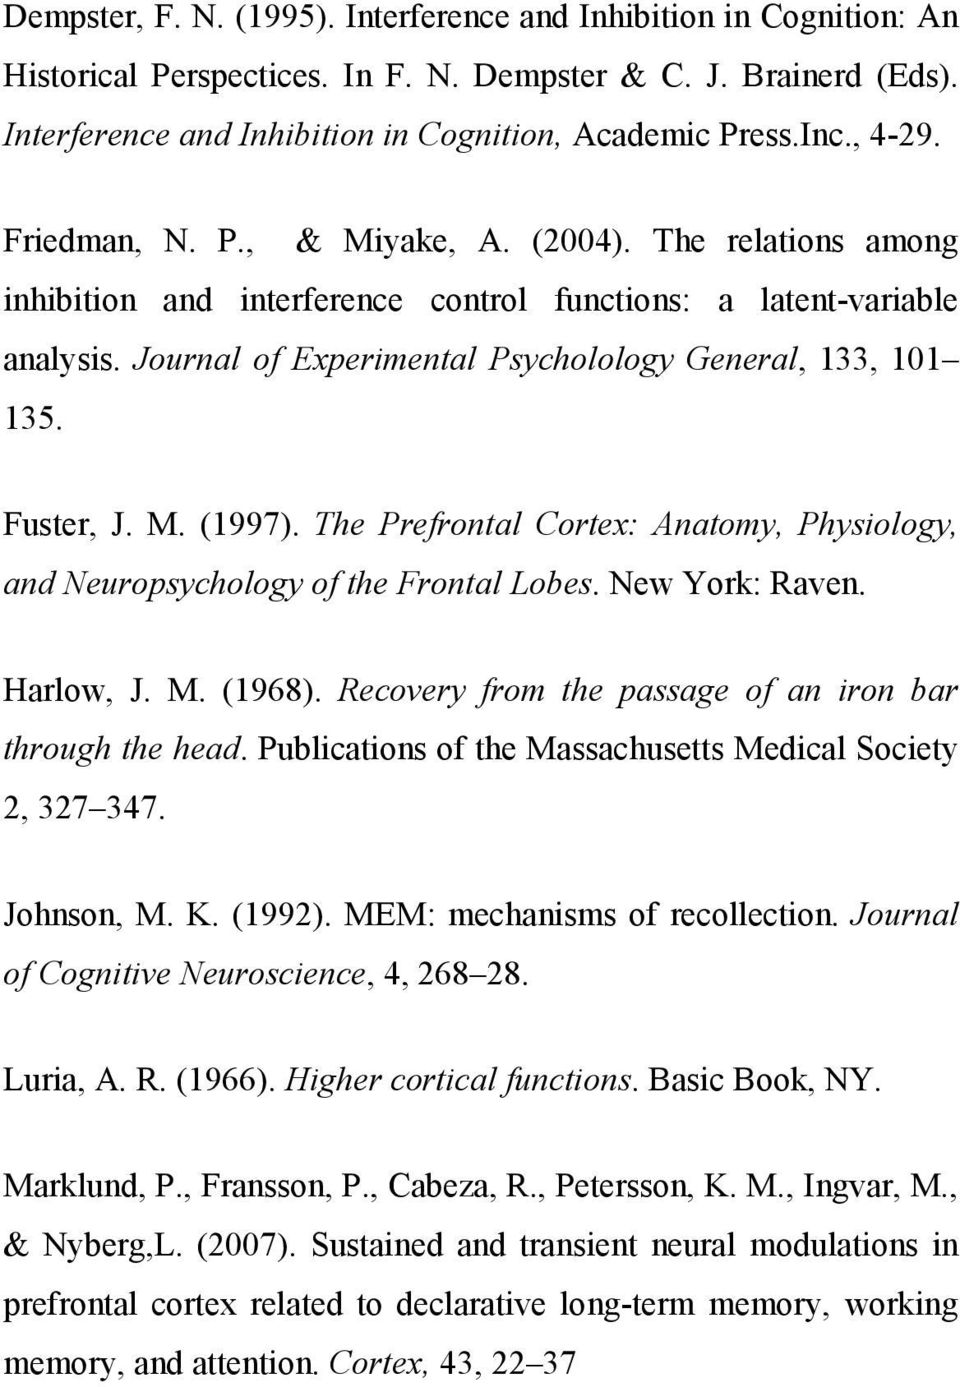 Fuster, J. M. (1997). The Prefrontal Cortex: Anatomy, Physiology, and Neuropsychology of the Frontal Lobes. New York: Raven. Harlow, J. M. (1968).